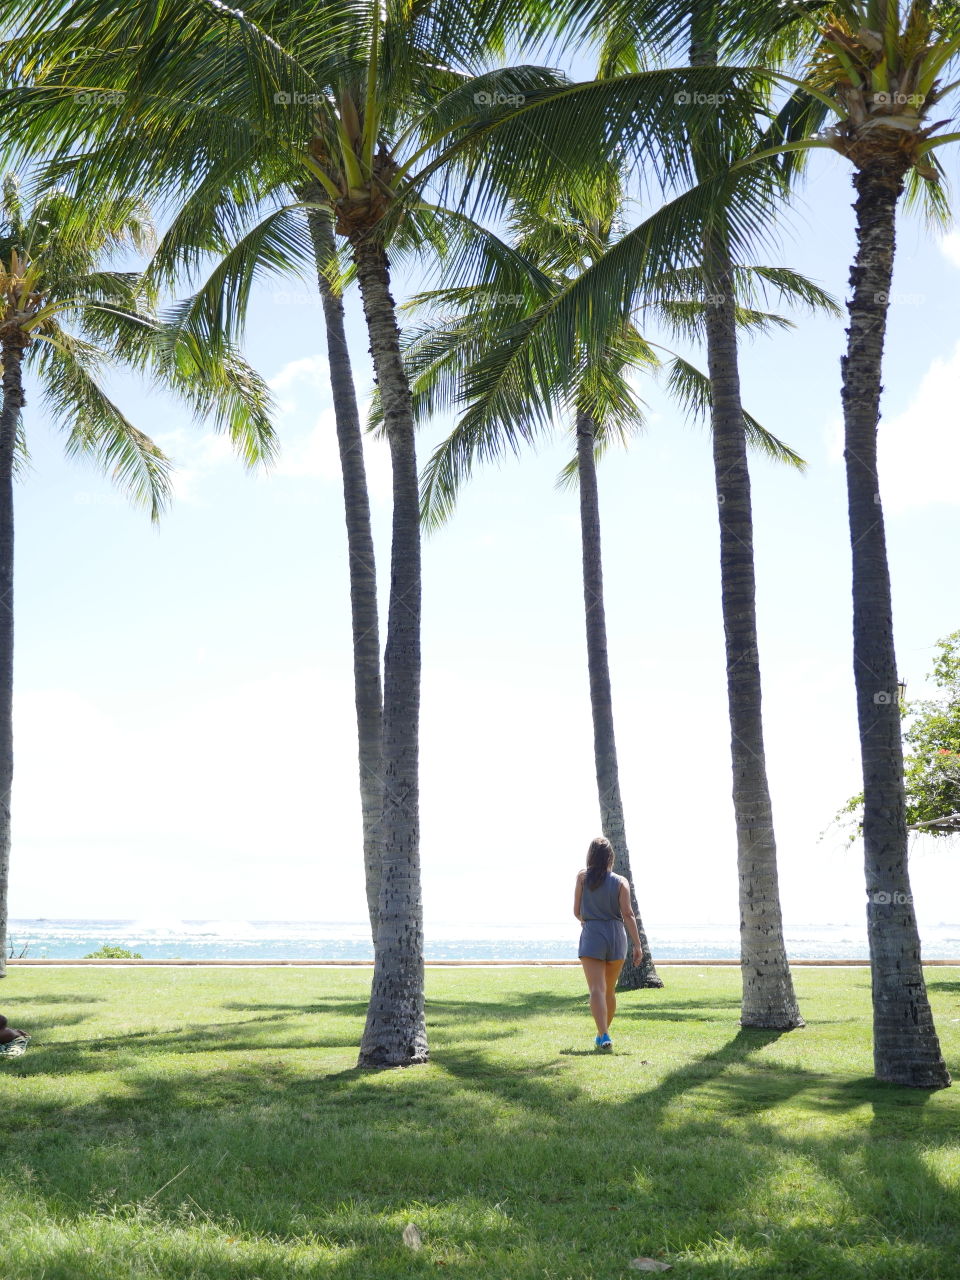 Walking between green palm trees in the park at the. Each in Hawaii 